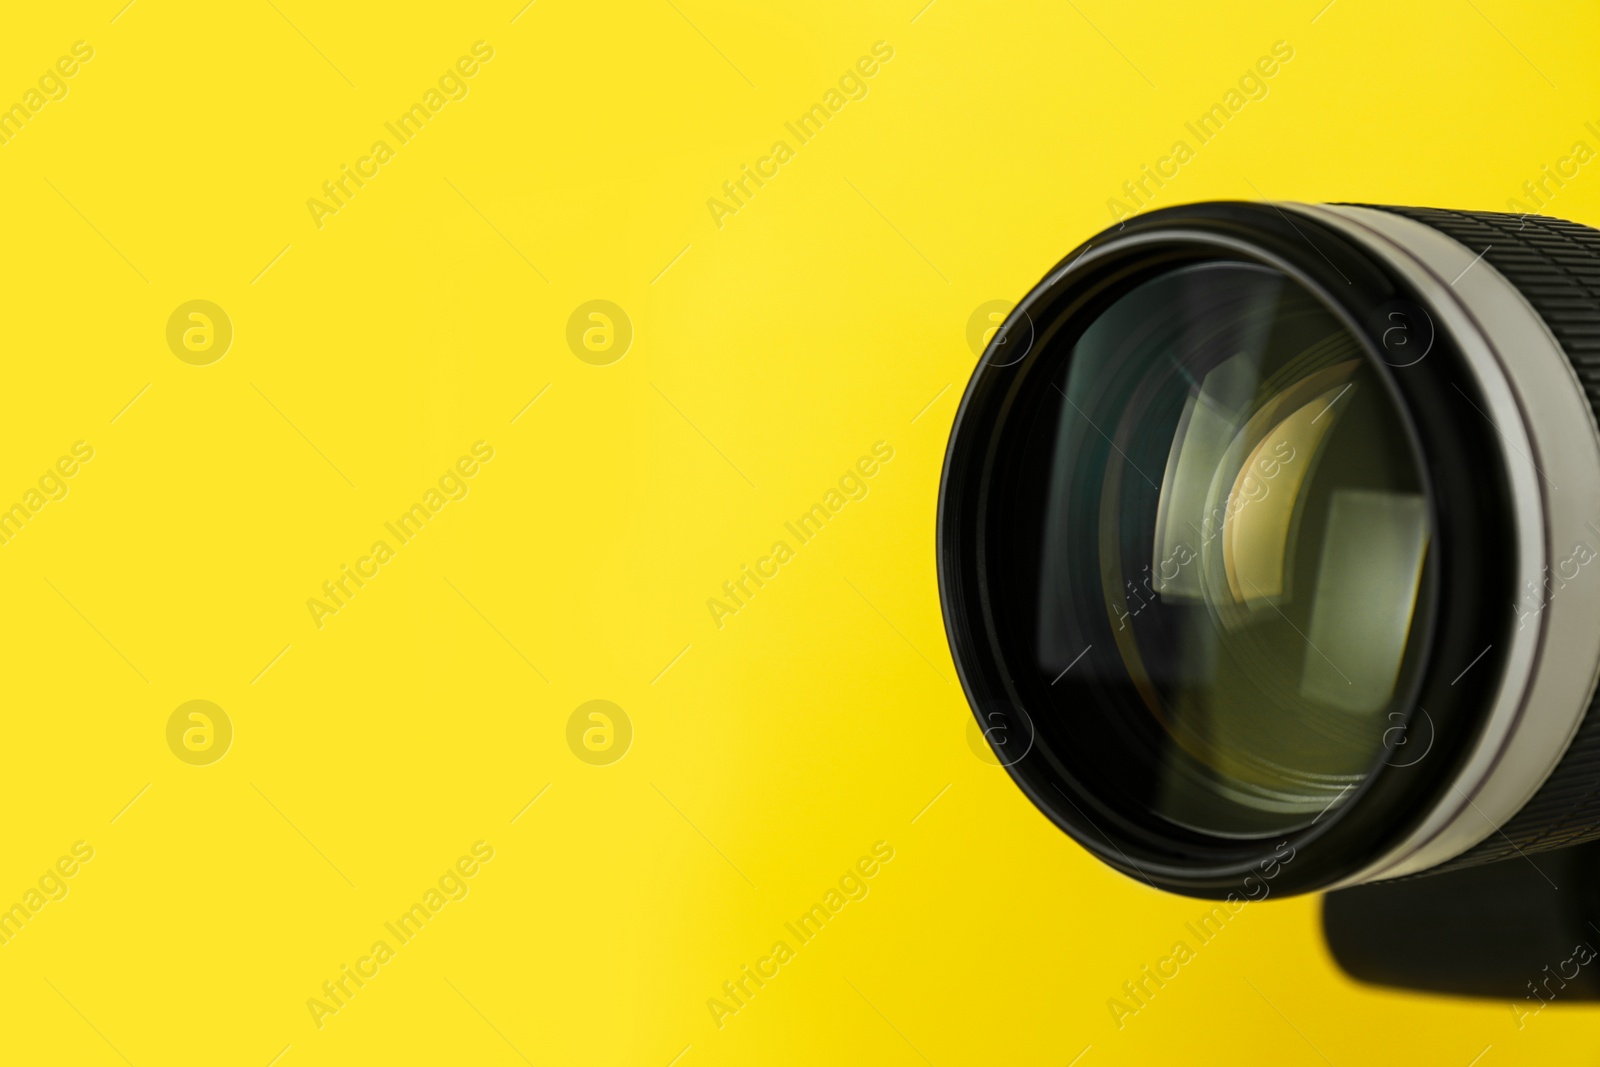 Photo of Professional video camera on yellow background, closeup view of lens. Space for text